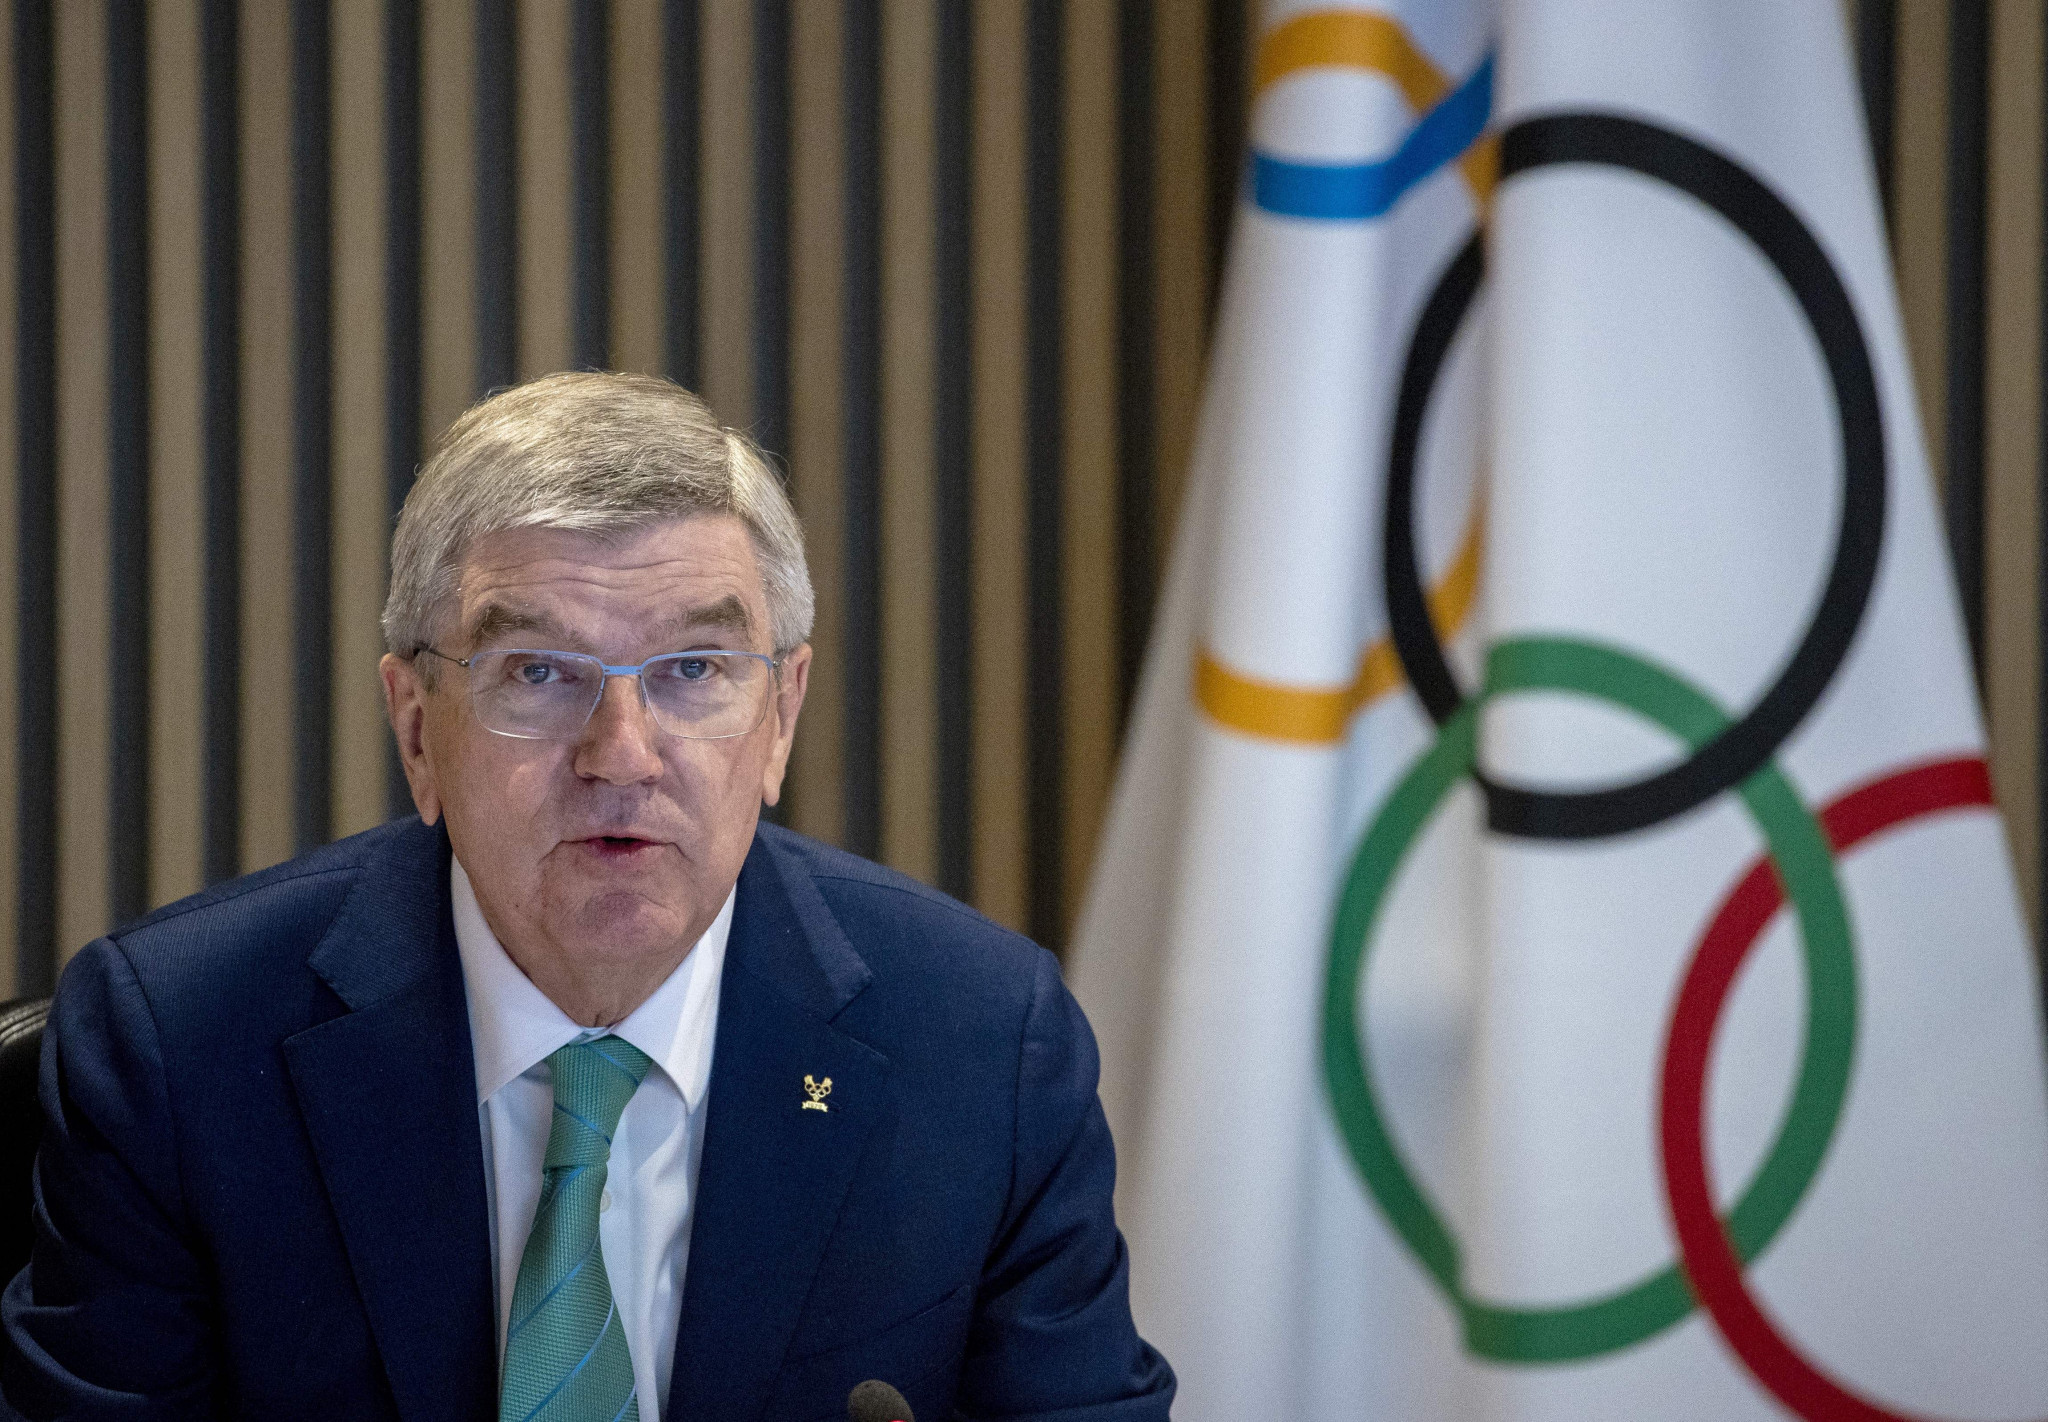 The IOC and President Thomas Bach encouraged a proposal by the OCA to enable athletes from Russia and Belarus to participate in its qualifying events for Paris 2024 at the Olympic Summit ©Getty Images